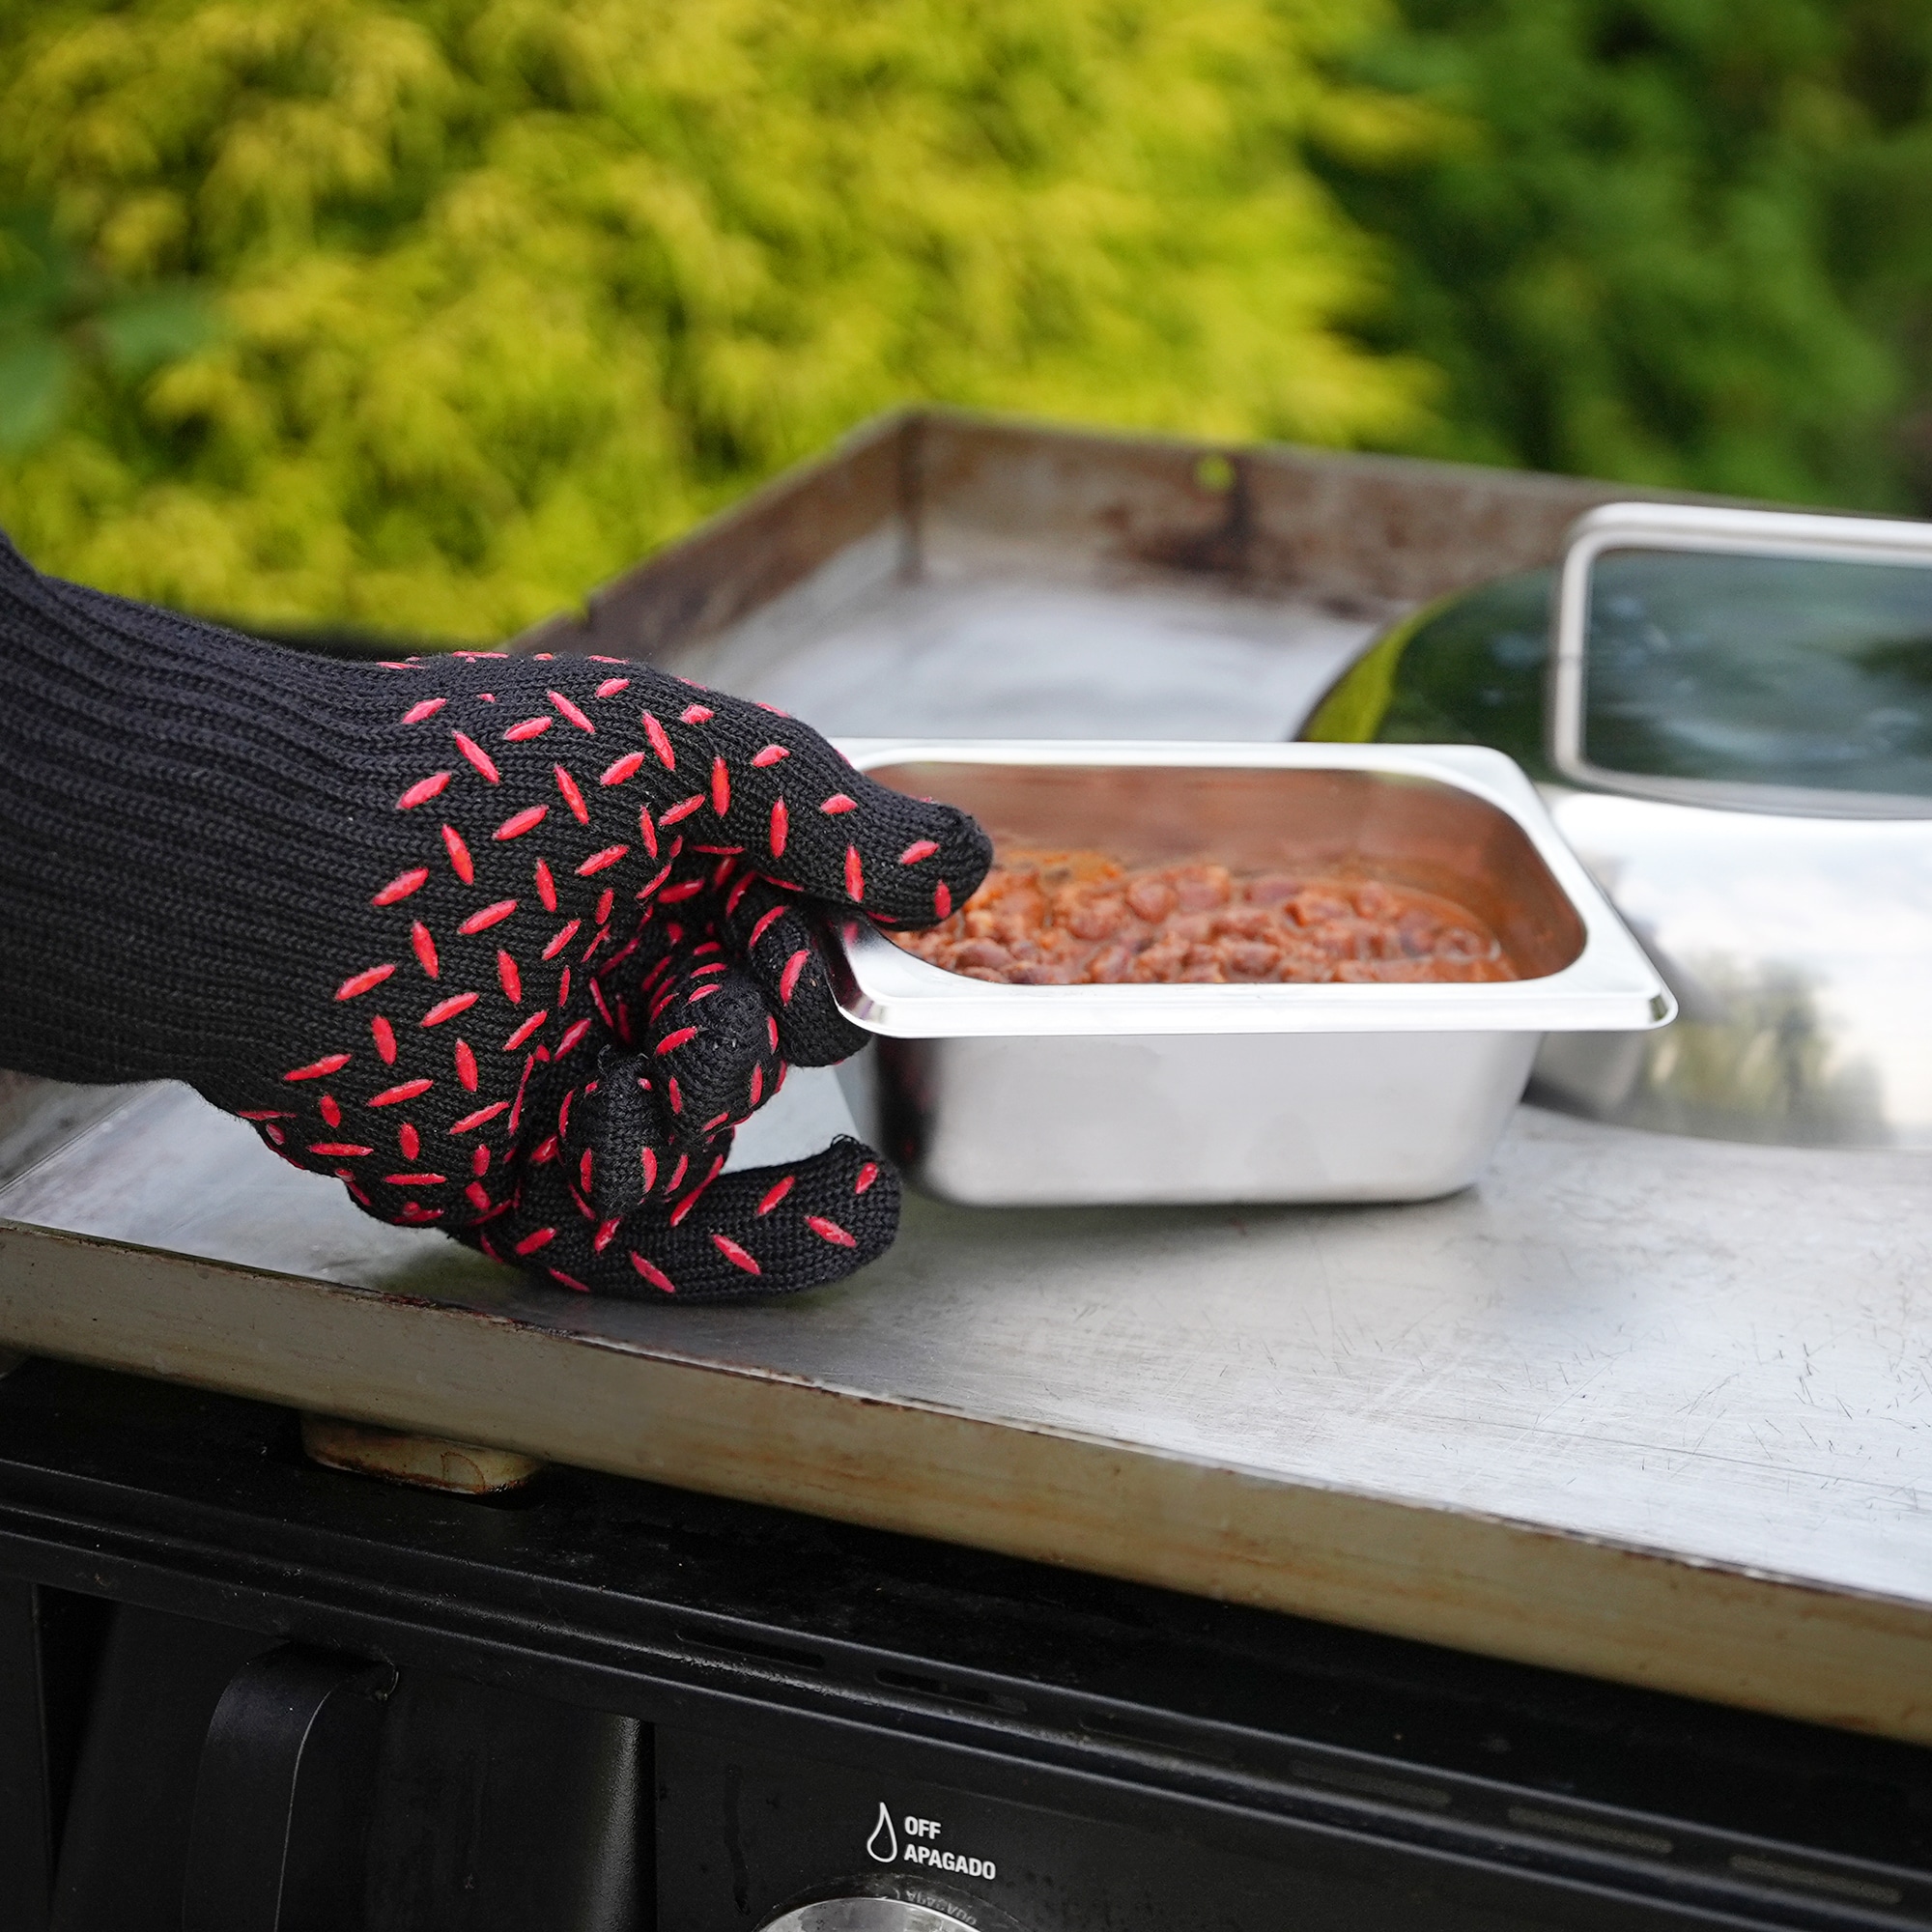  Best Oven Gloves for high Temperature, Baking Gloves,  Heat-Resistant Gloves, Grill Gloves, BBQ Gloves, Cooking Gloves. Oven Mitts,  Kitchen Hand Gloves, Oven Hand Gloves. Fit All Hands : Patio, Lawn 